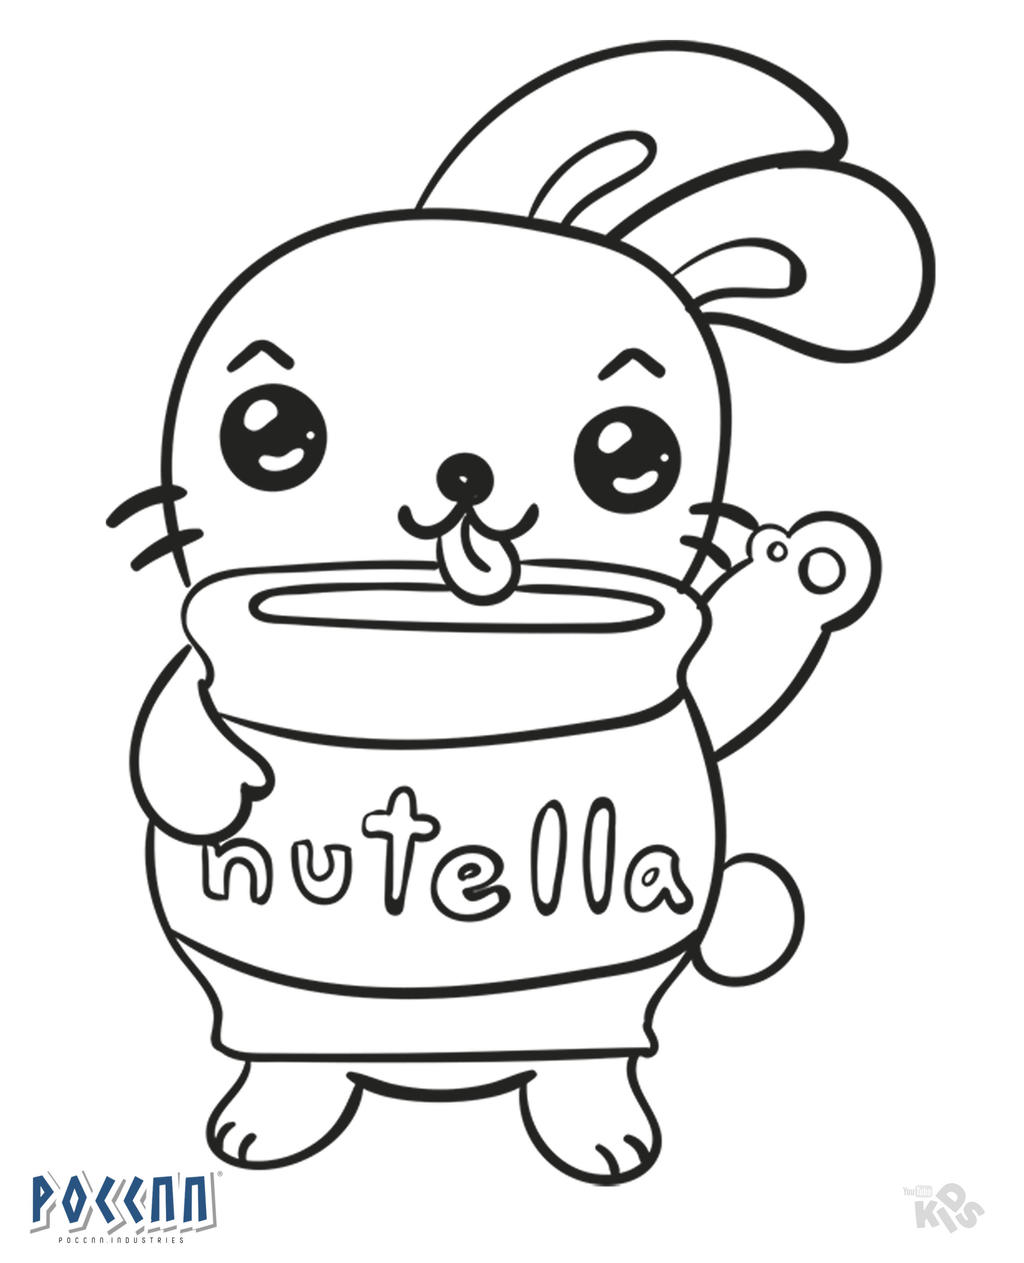 Rabbit and Nutella Kawaii to color Lineart by PoccnnIndustries ...